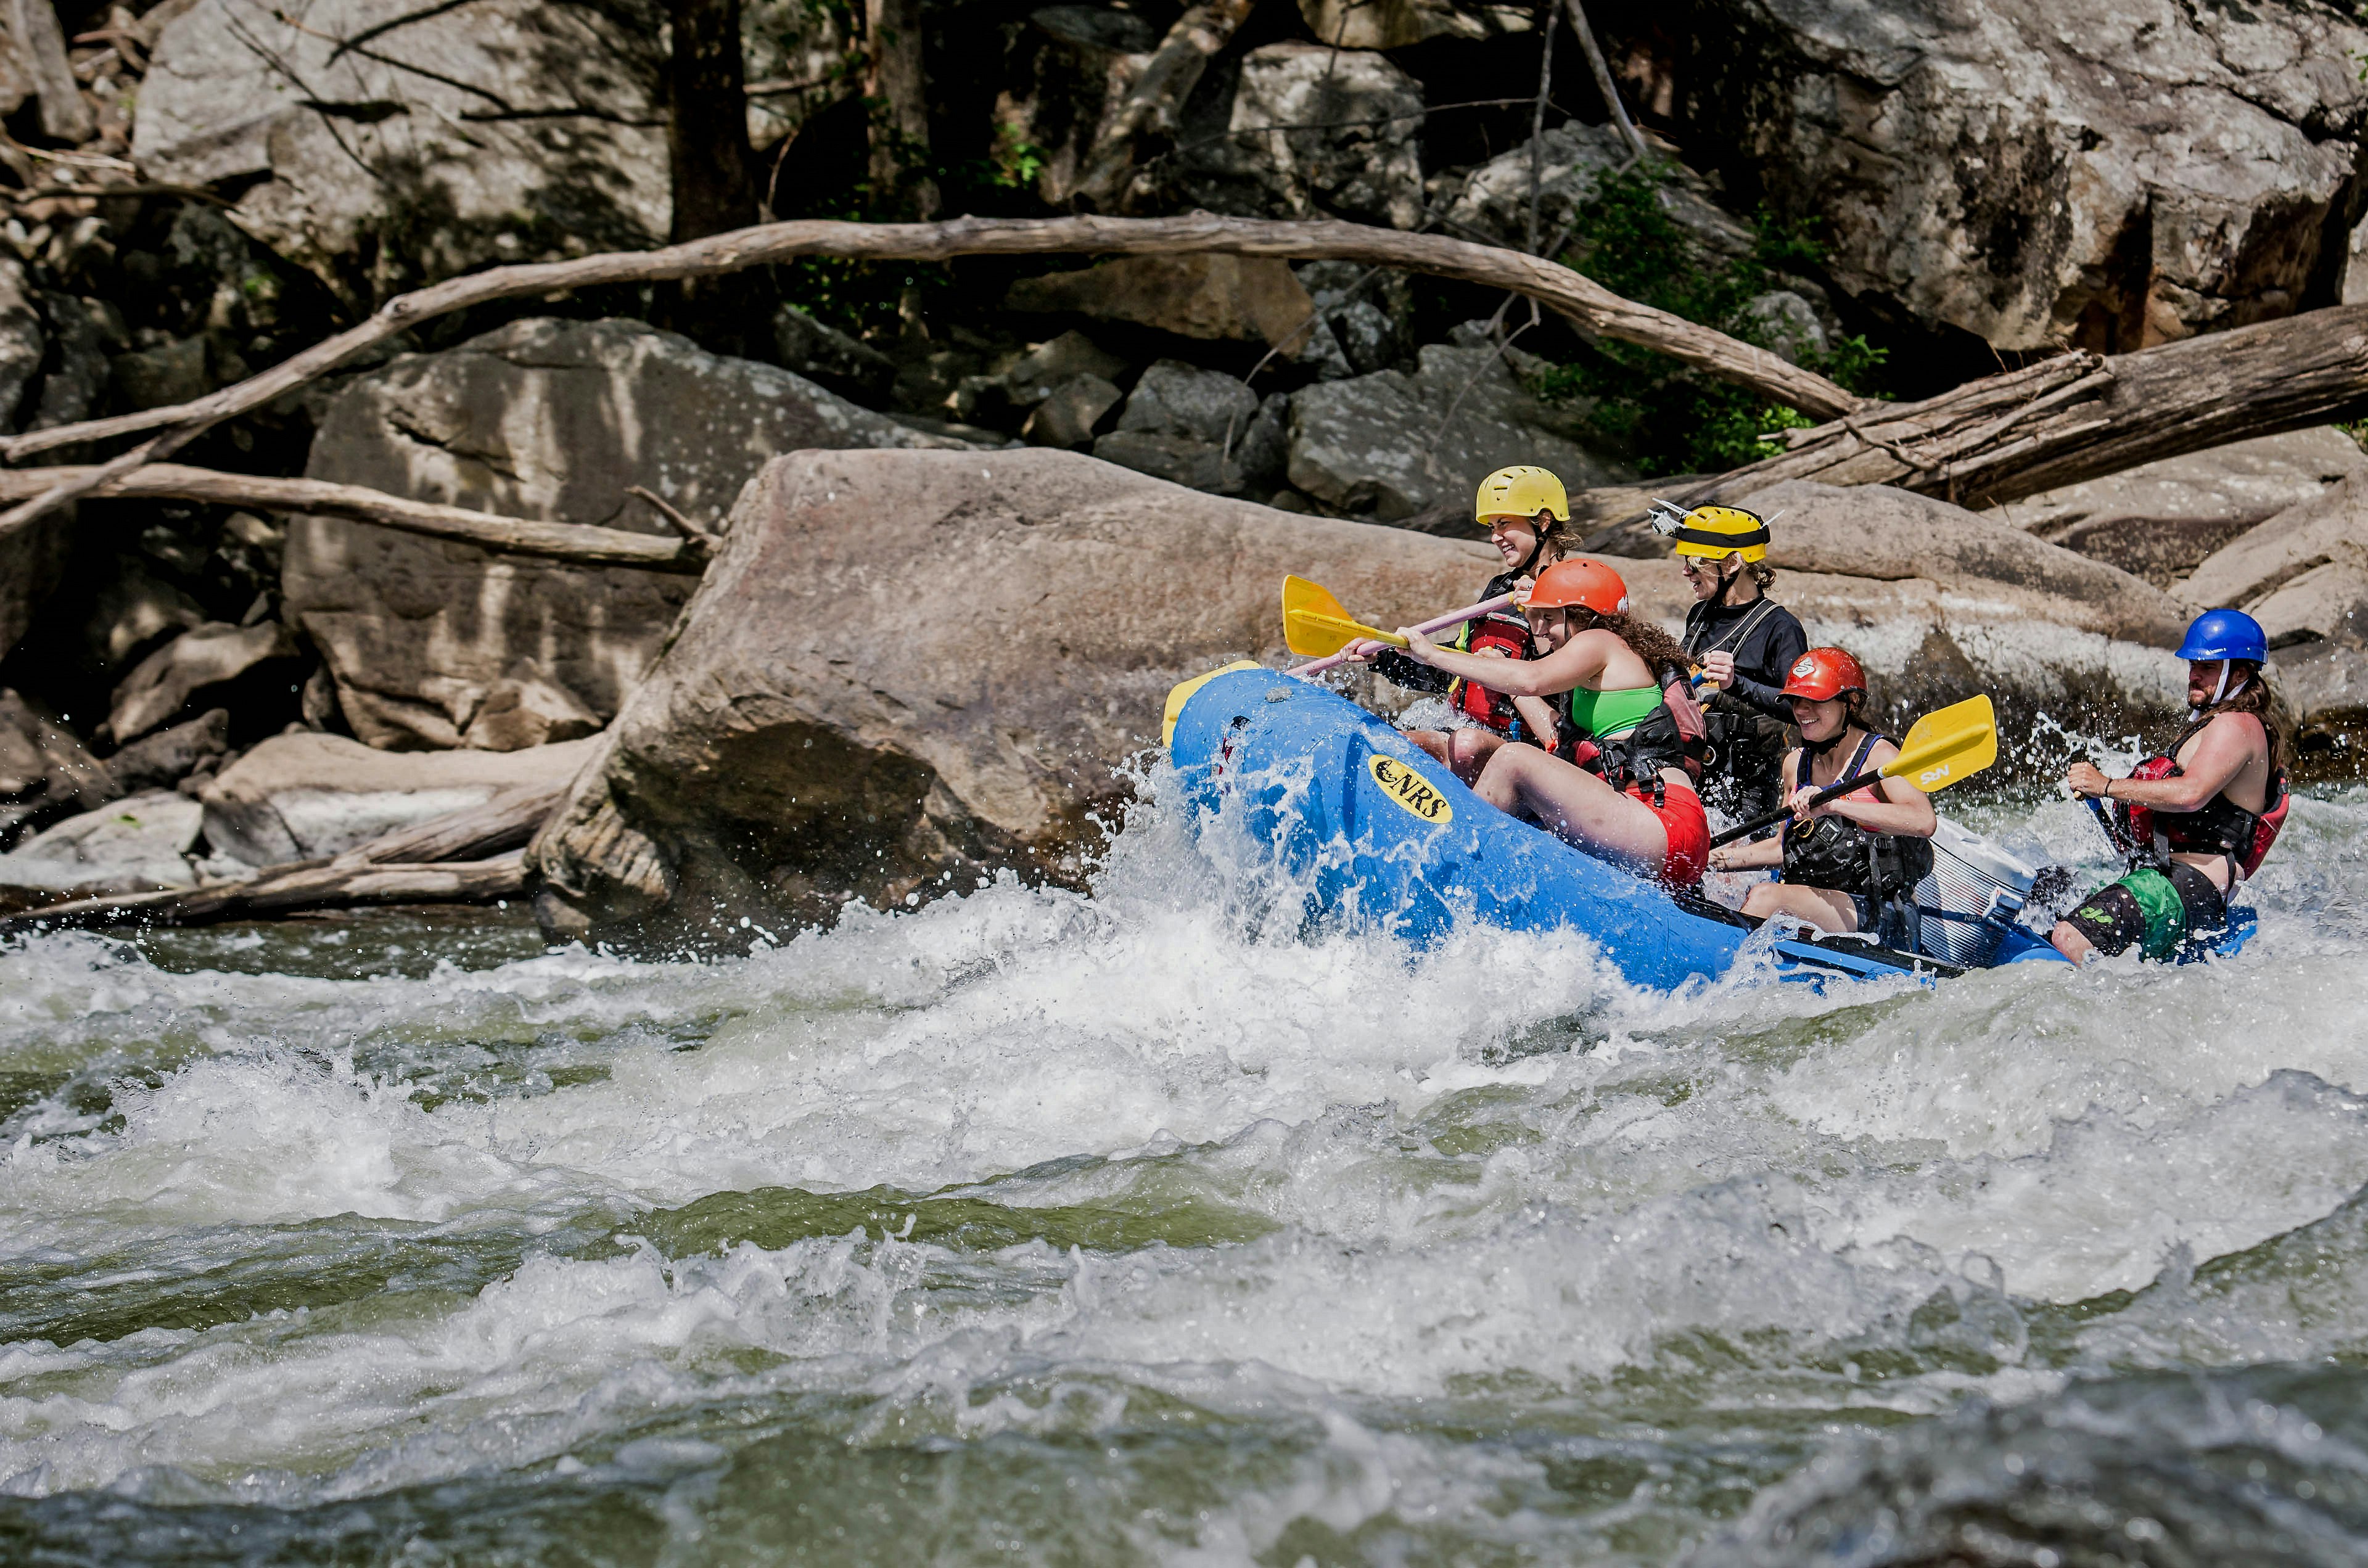 Large rocks are visible as a raft crashes through the rapids in West Virginia. A number of branches are also visible.